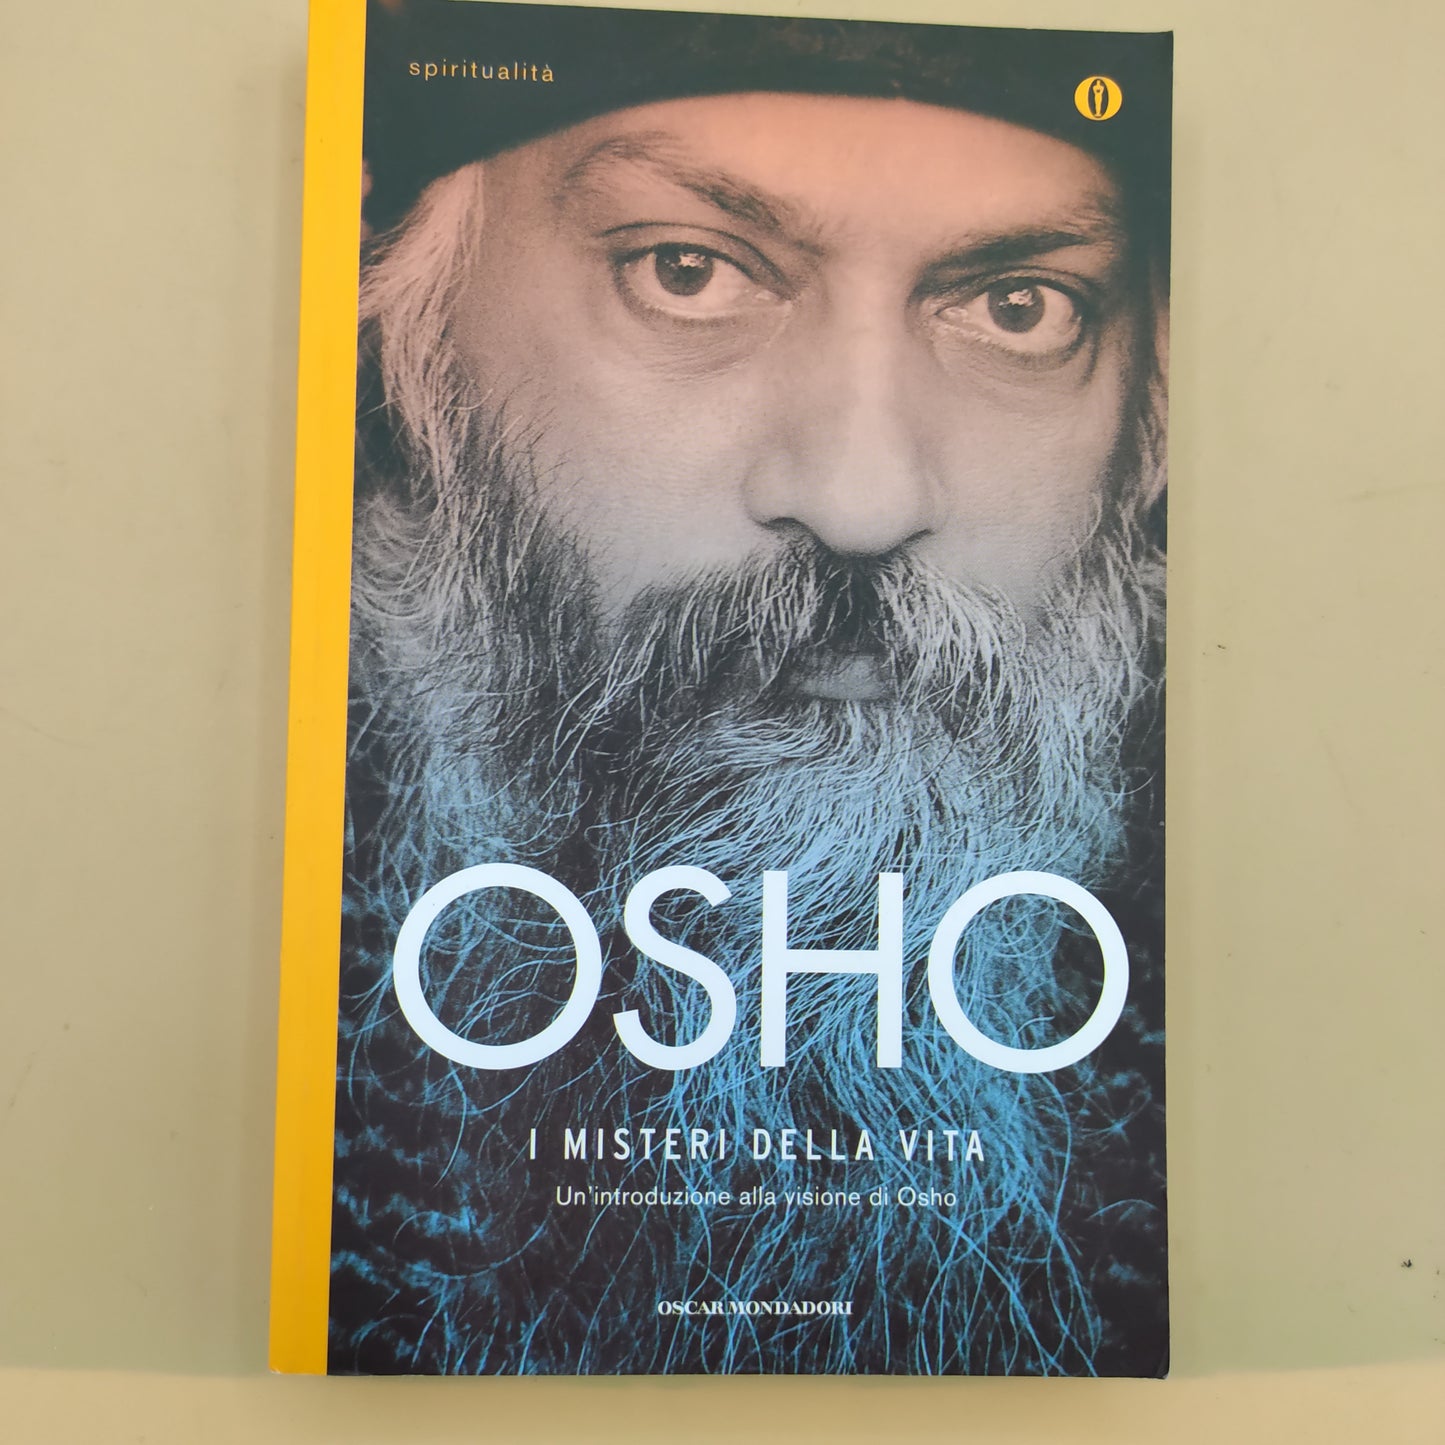 The mysteries of life. An introduction to Osho's vision - Osho